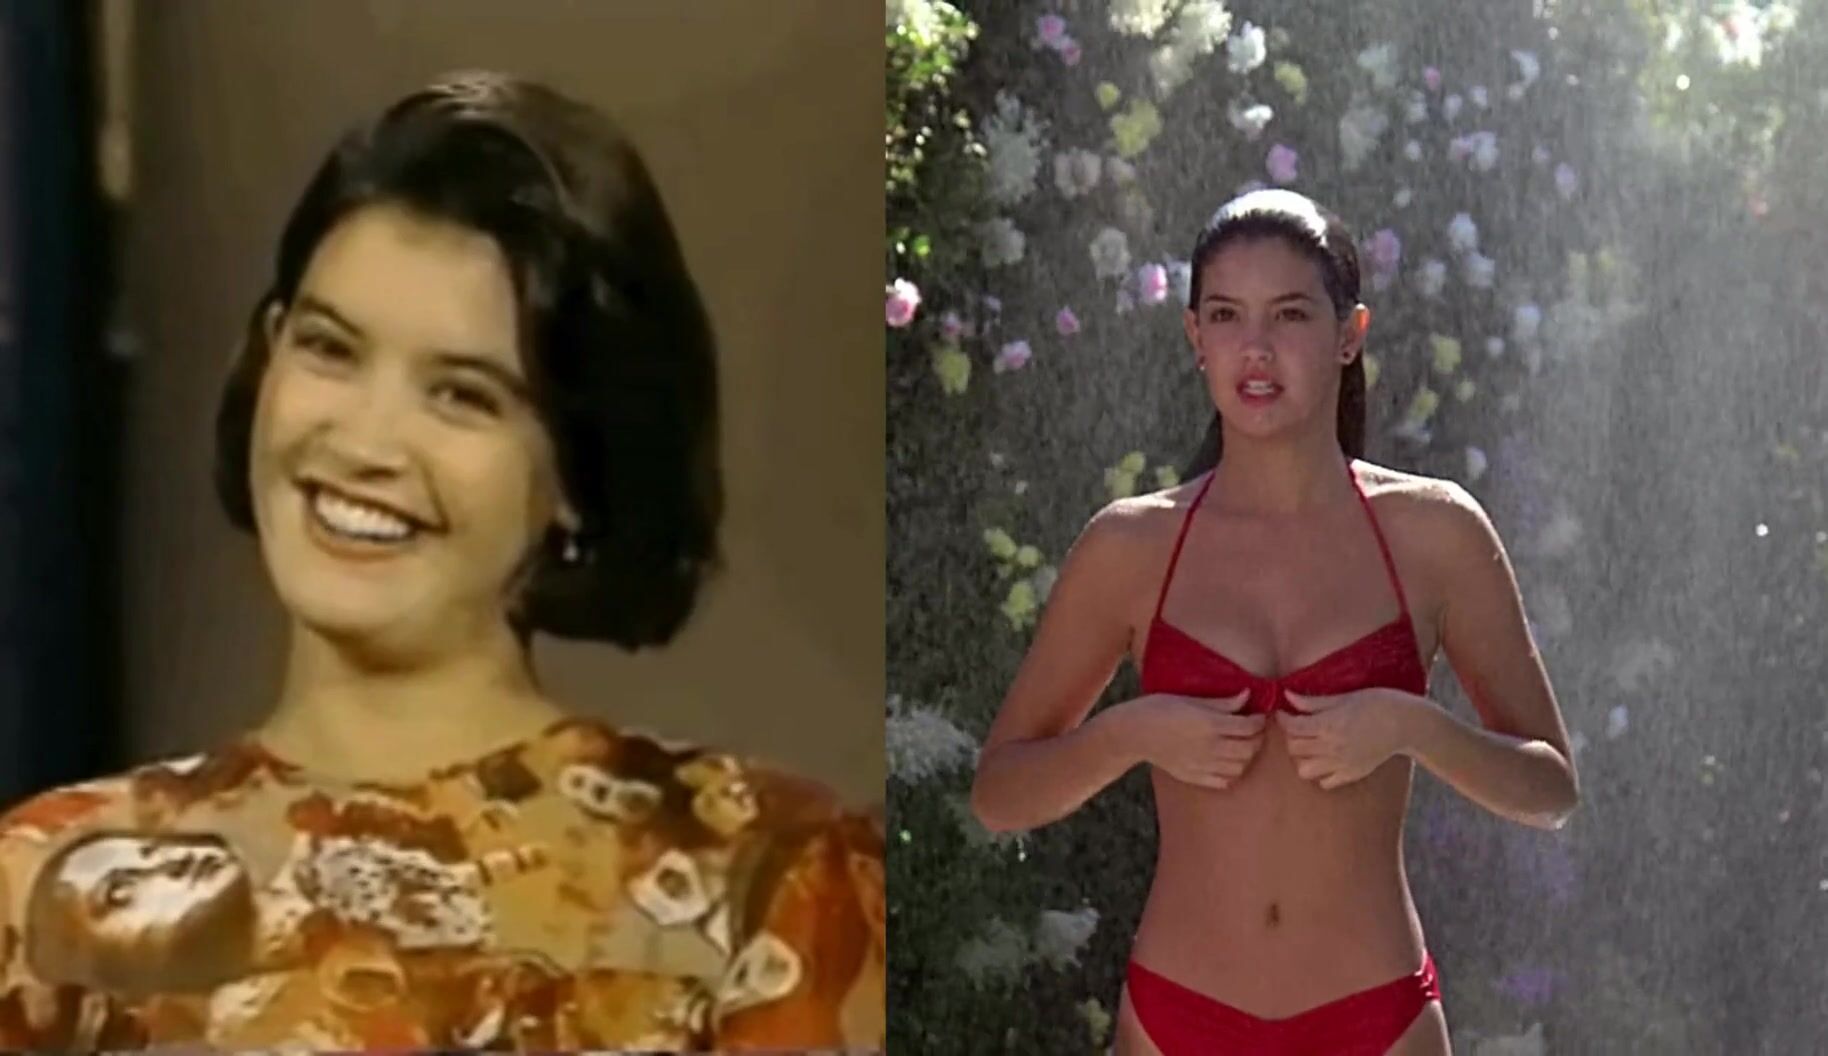 Phoebe Cates side by side